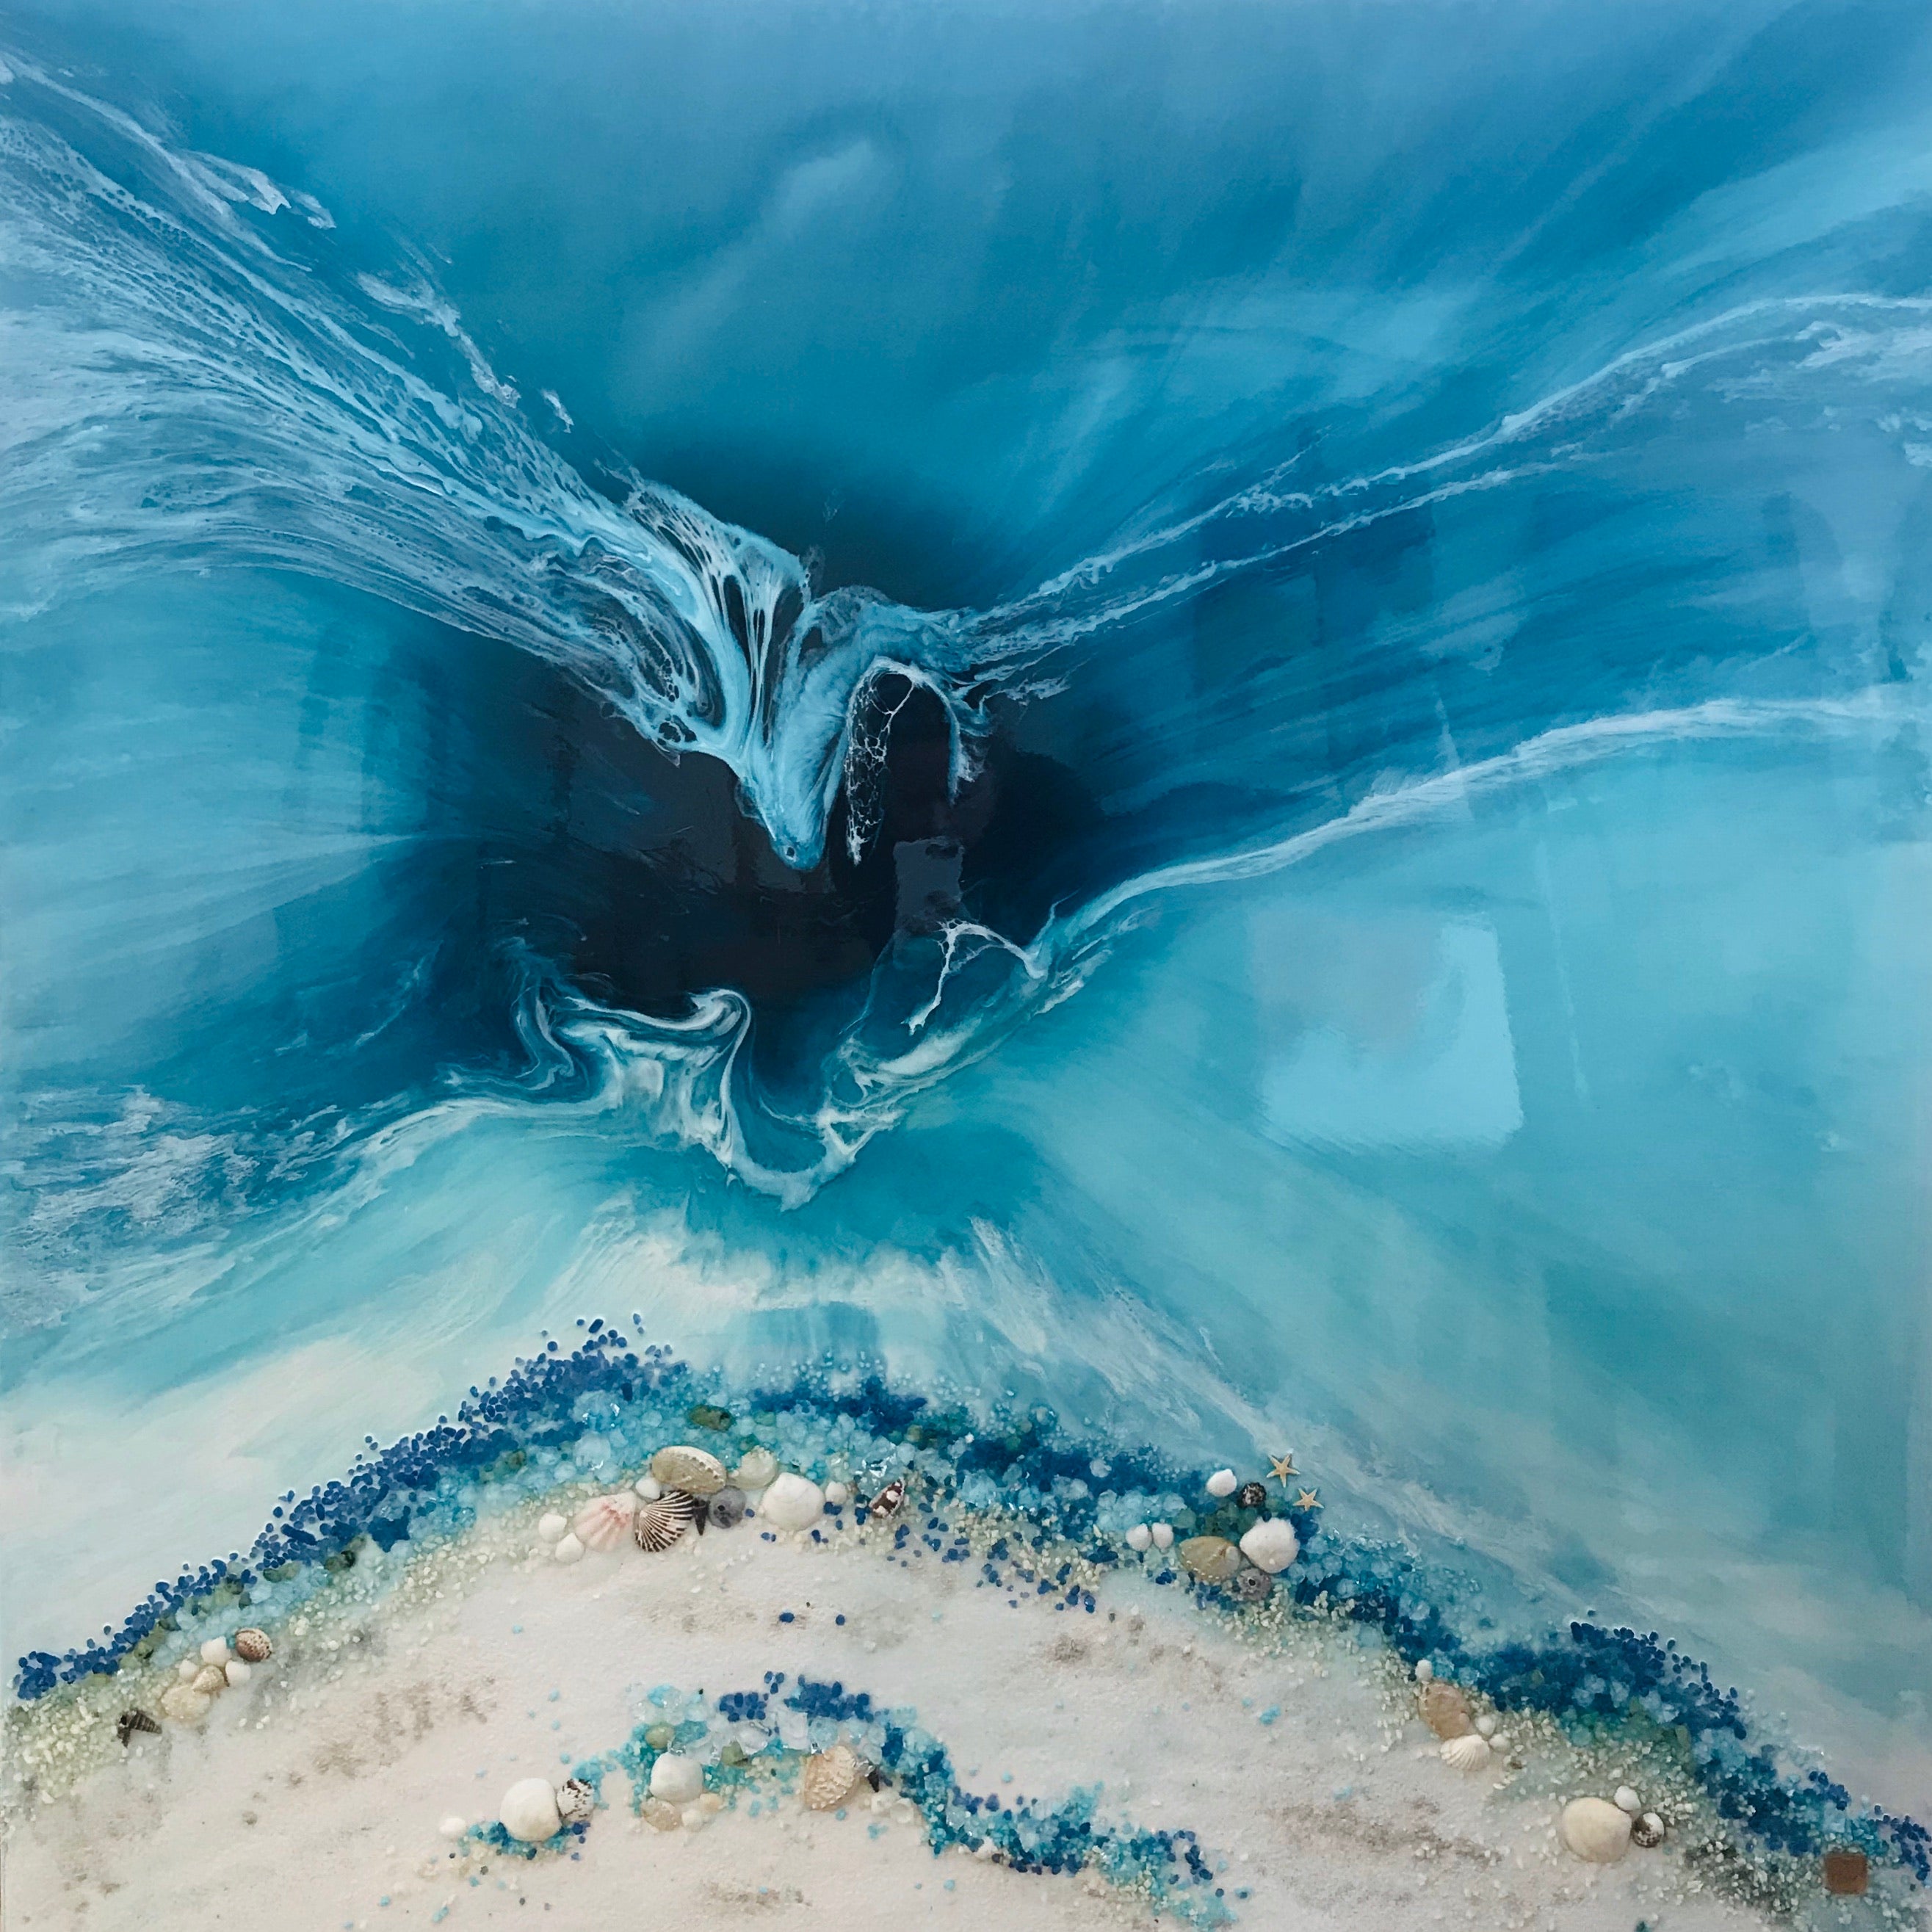 TEAL AND WHITE. Crystal clear. Ocean Original Artwork. Antuanelle 4 Clear. Artwork with Amazonite. 90x90cm